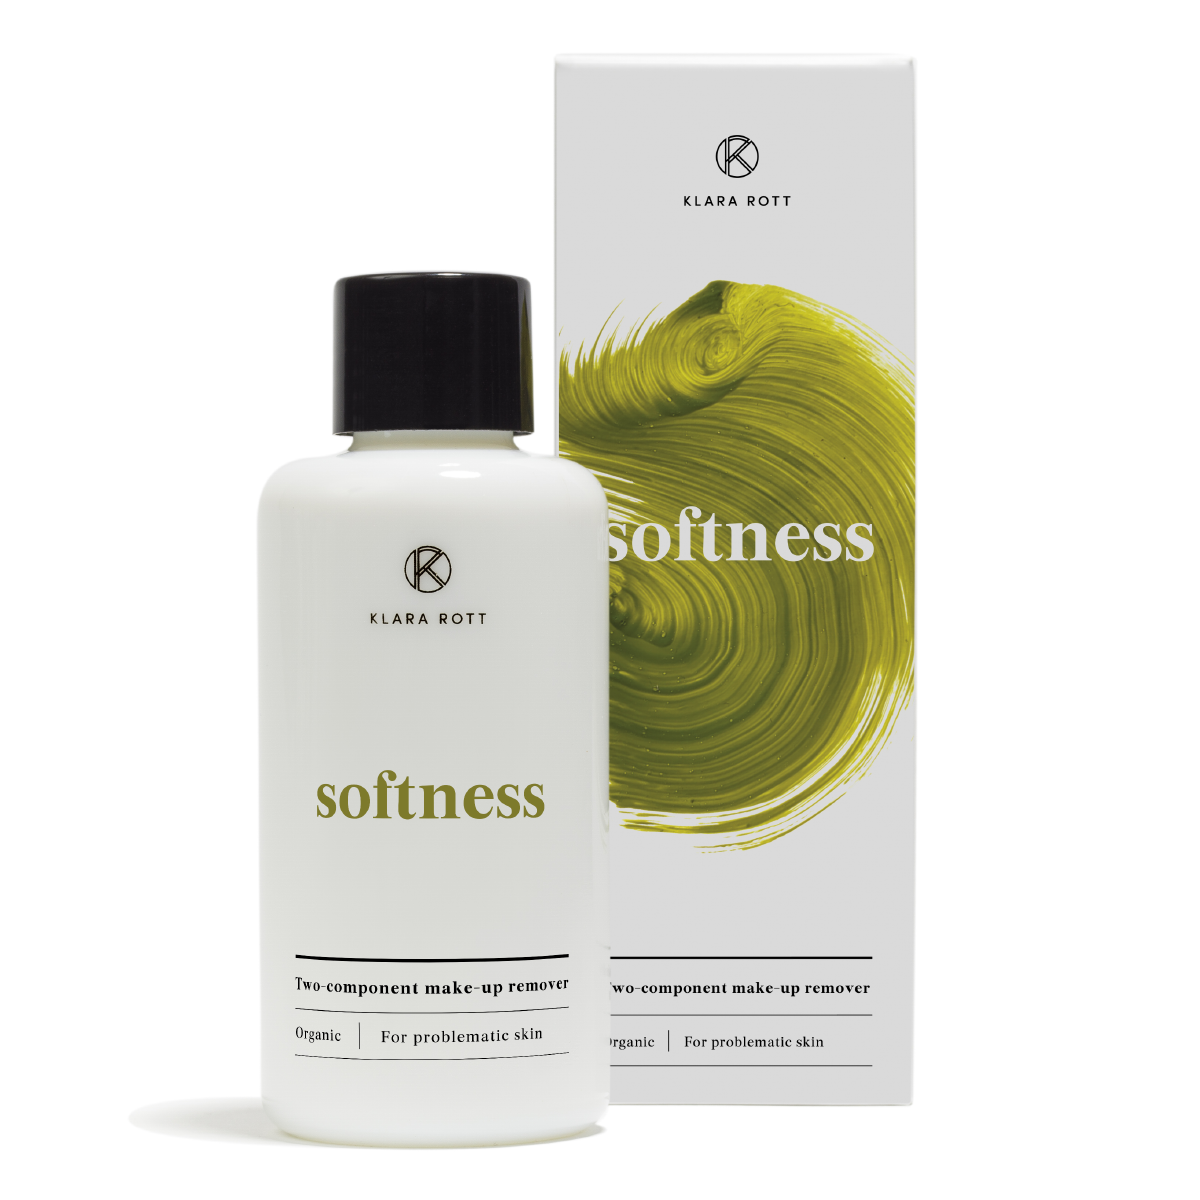 Softness - Nourishing two-component makeup remover for problematic skin 